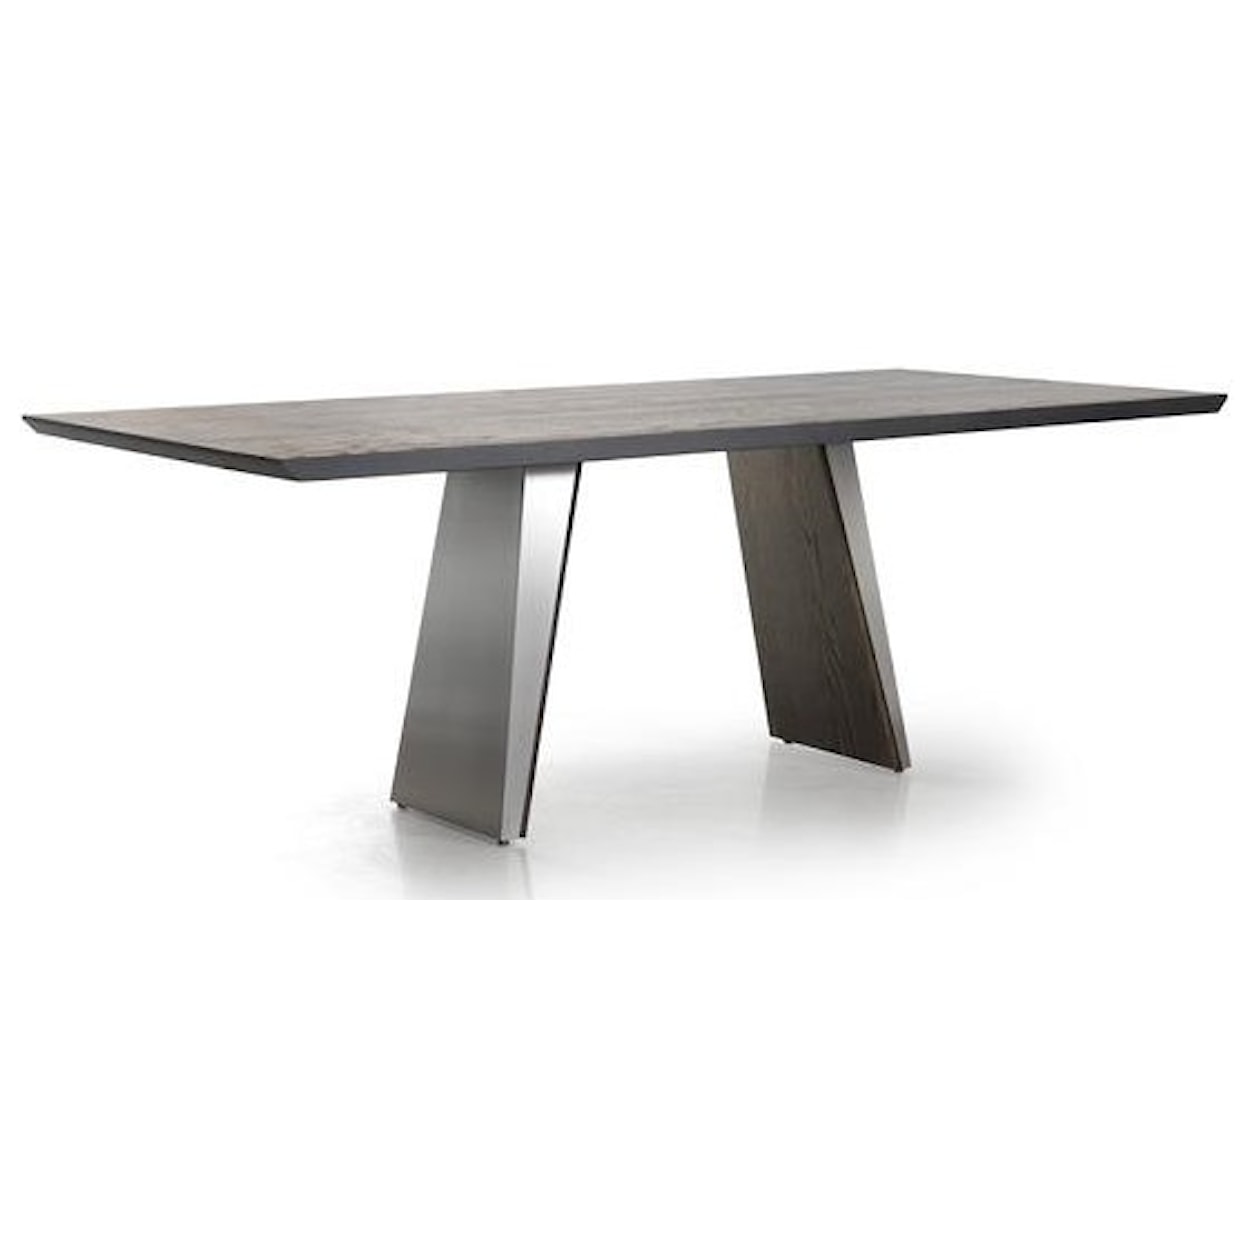 Trica Timeless Timeless Dining Table